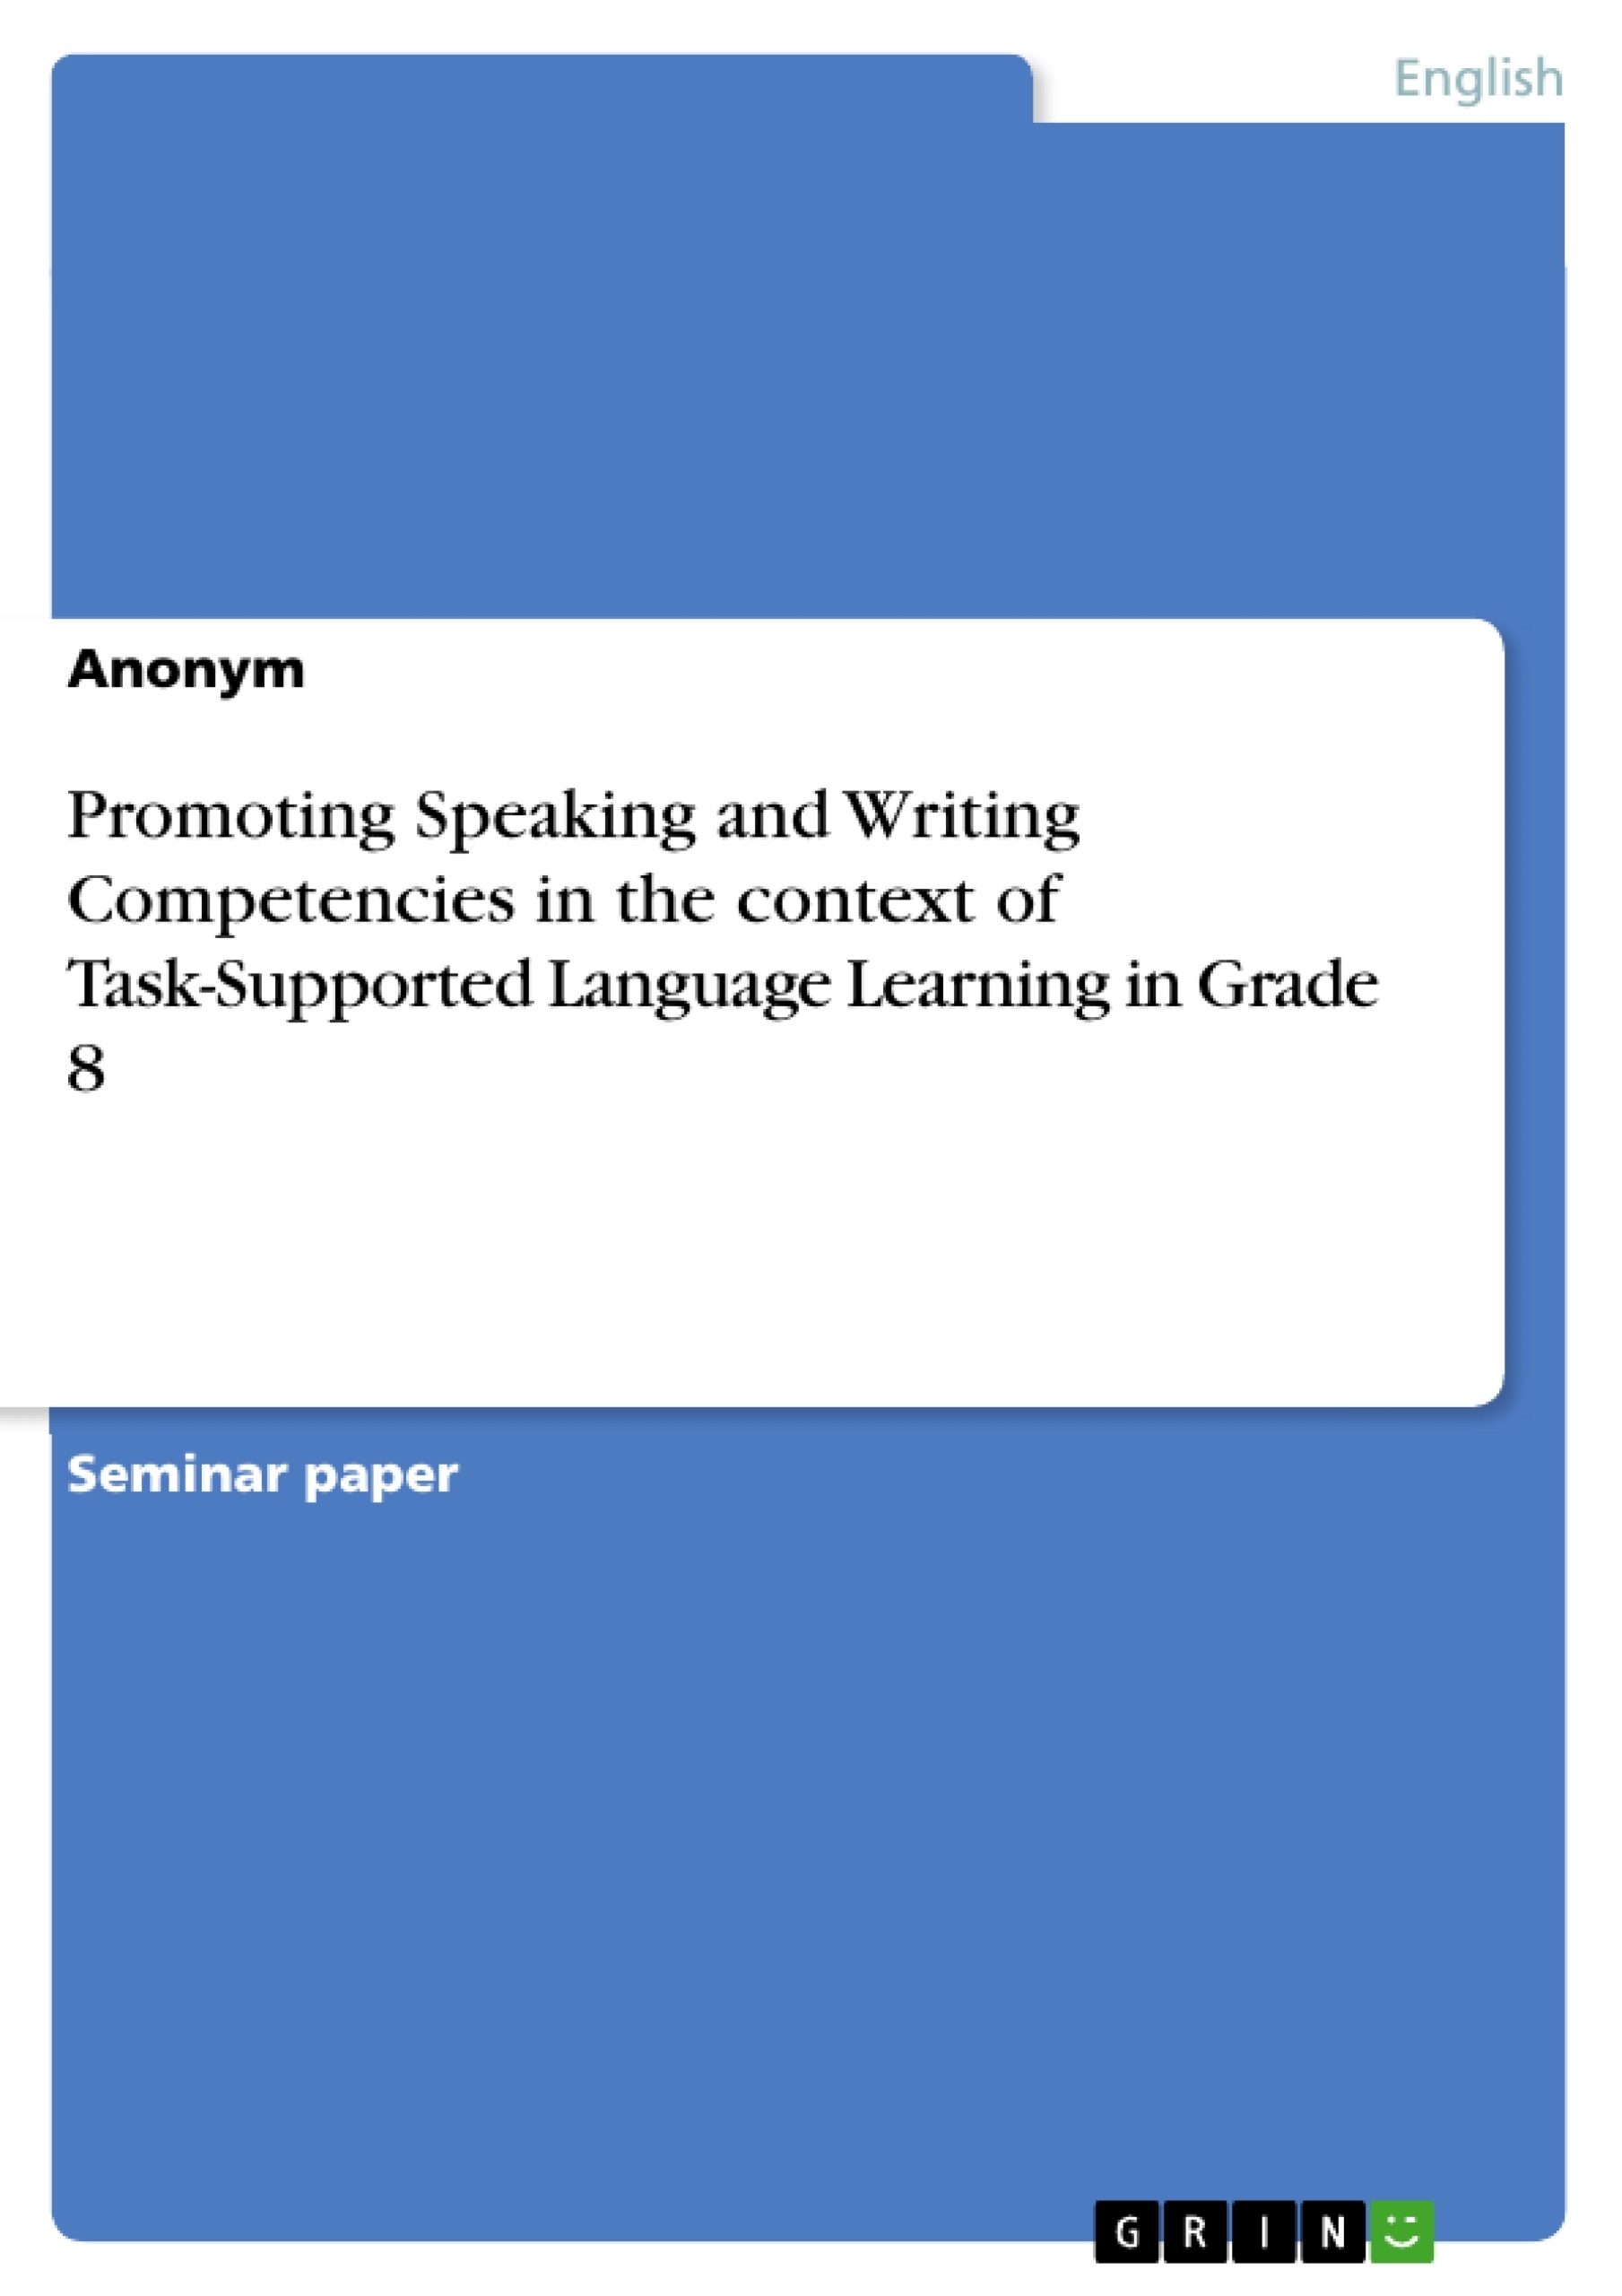 Title: Promoting Speaking and Writing Competencies in the context of Task-Supported Language Learning in Grade 8